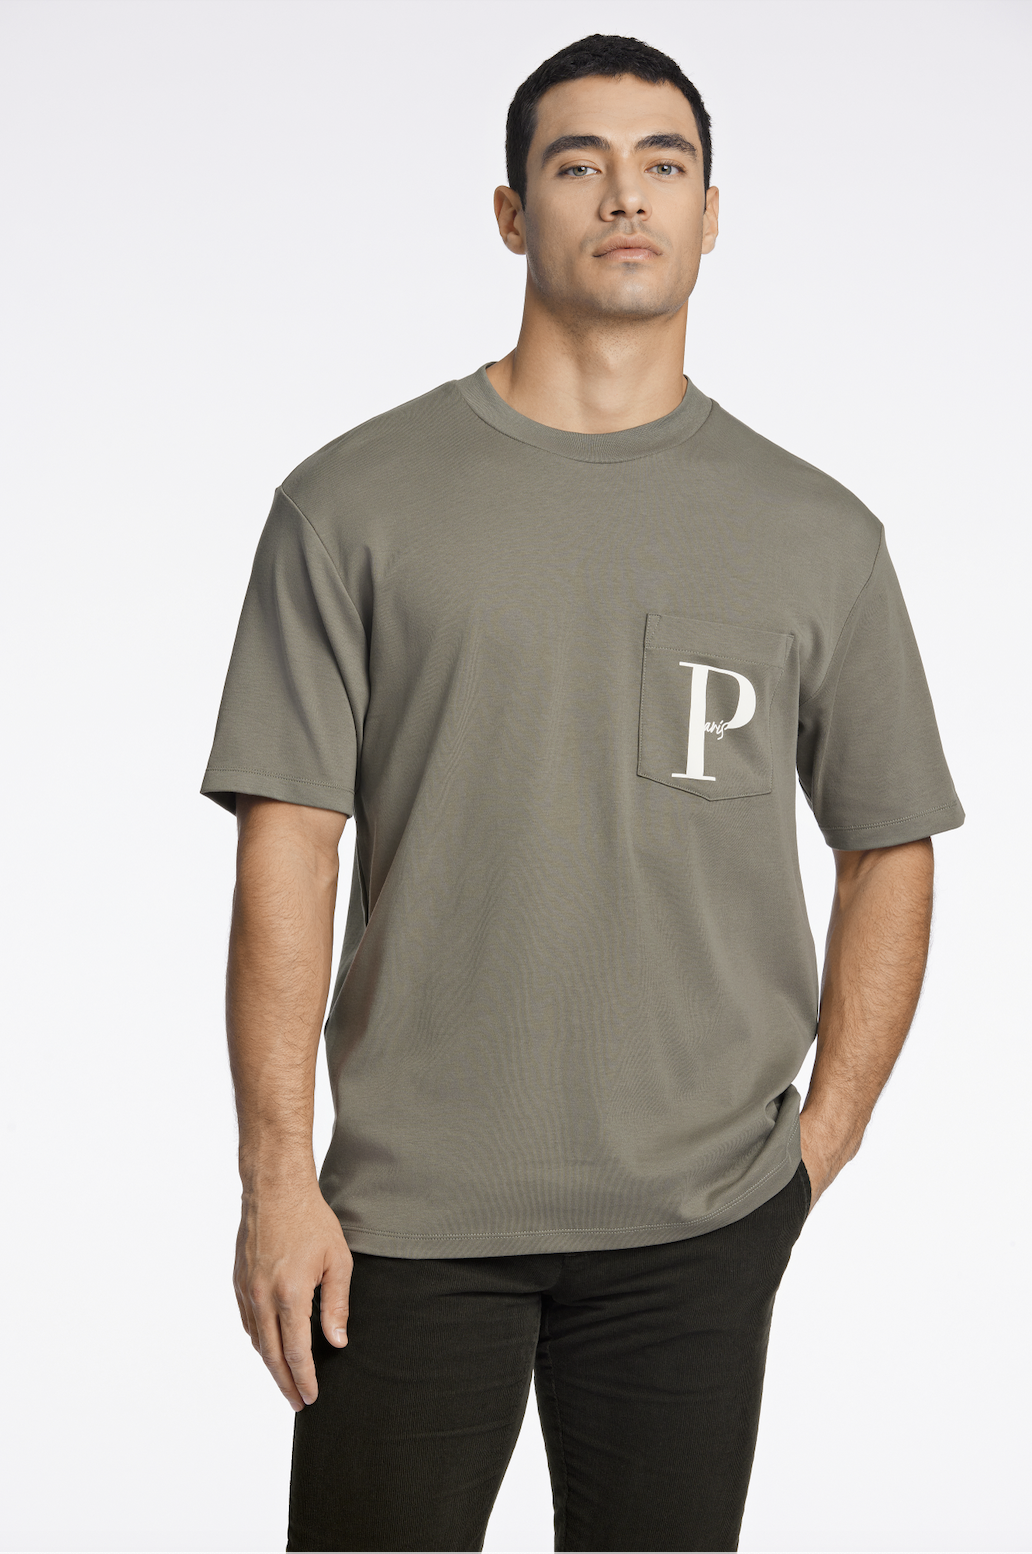 Oversized Chest Pocket Tee S/S Style: 30-400240US